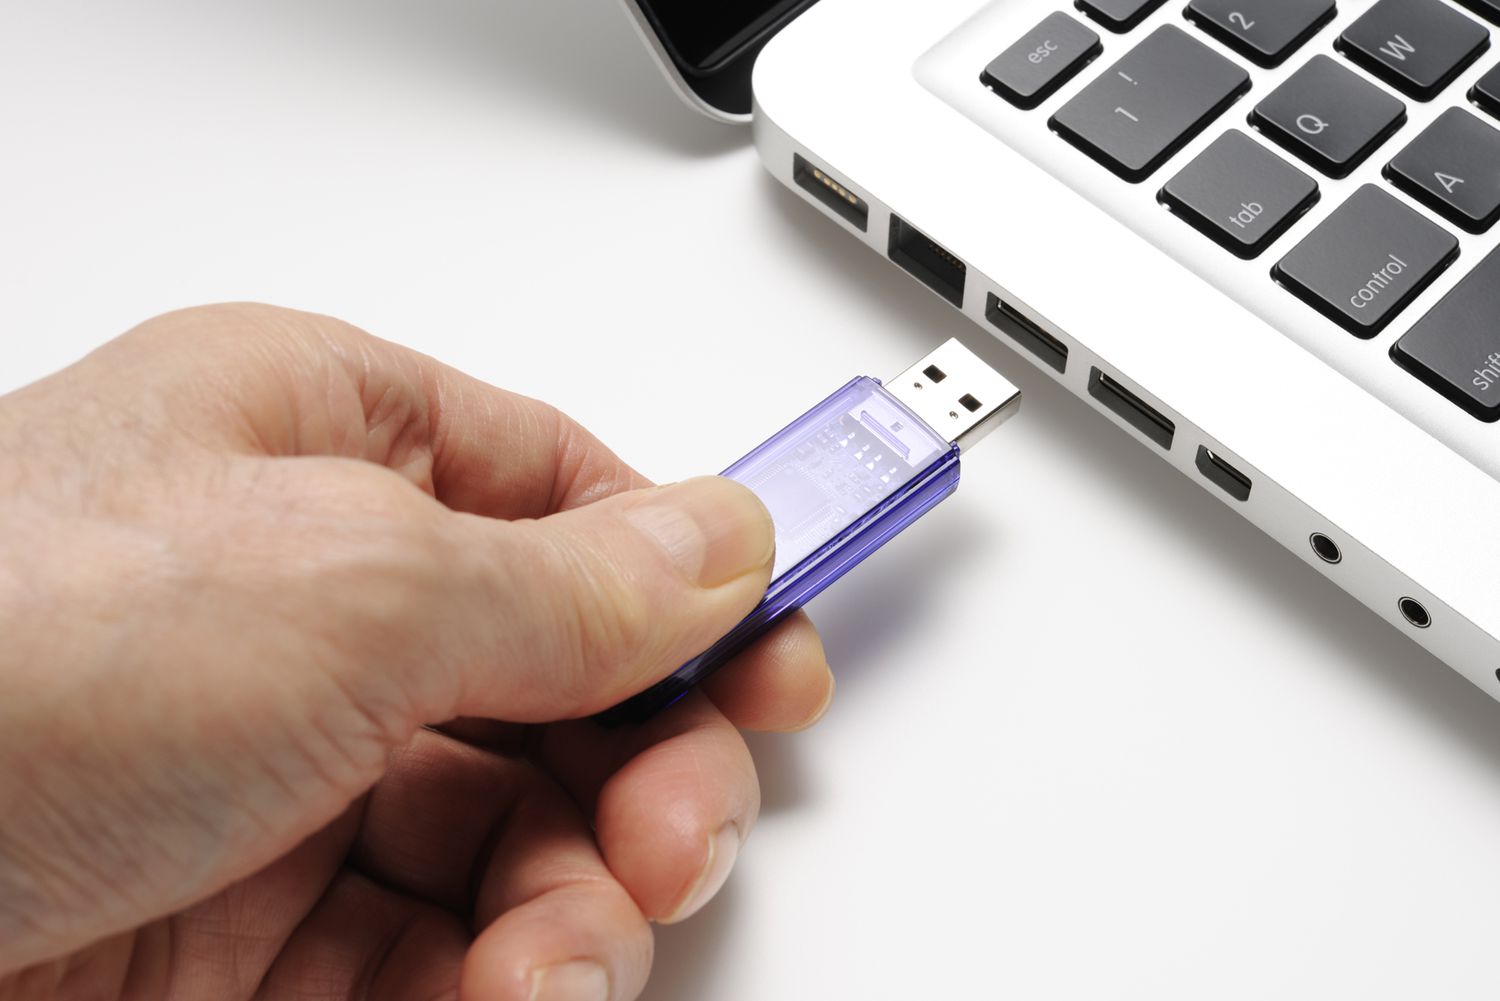 15-facts-about-national-flash-drive-day-april-5th